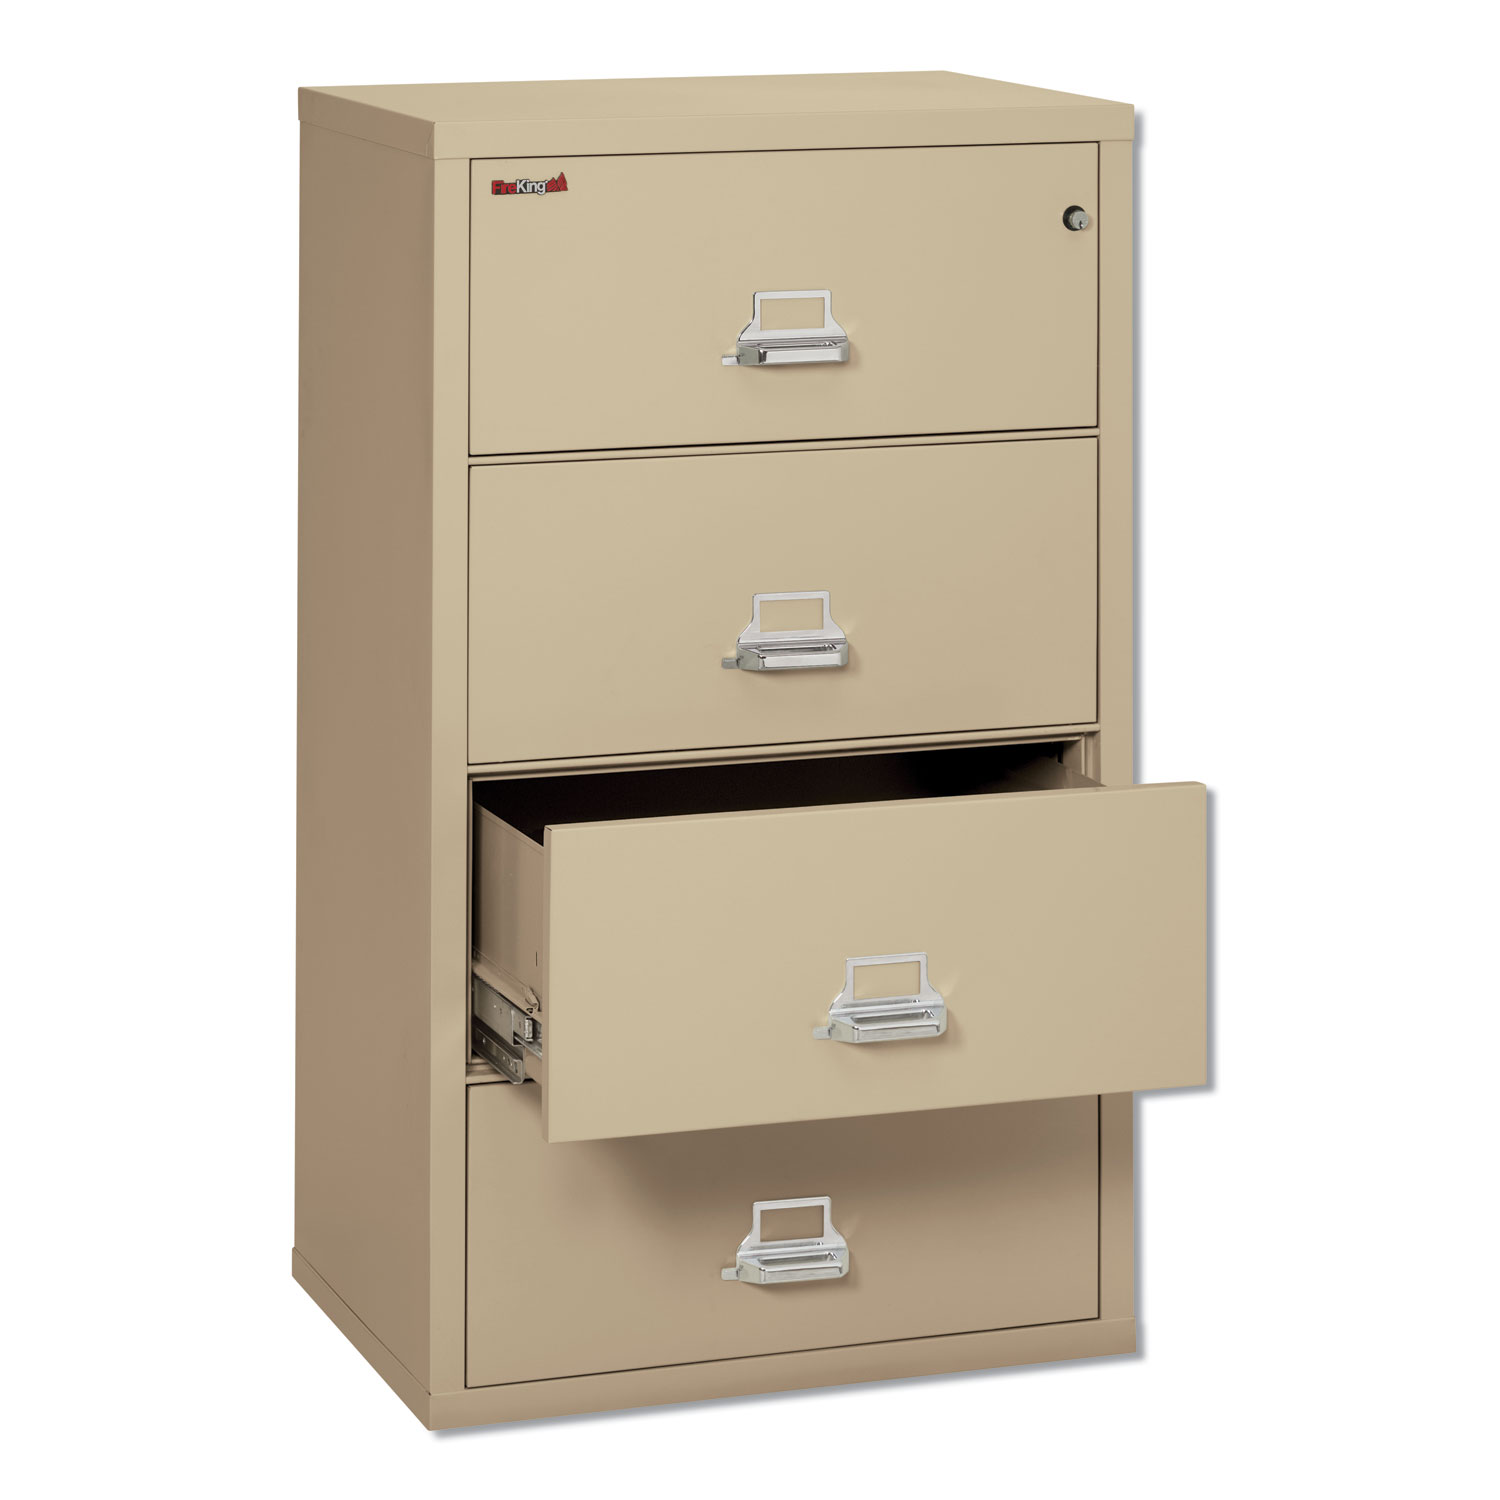 Four-Drawer Lateral File, 31 1/8 x 22 1/8, UL Listed 350, Ltr/Legal, Parchment